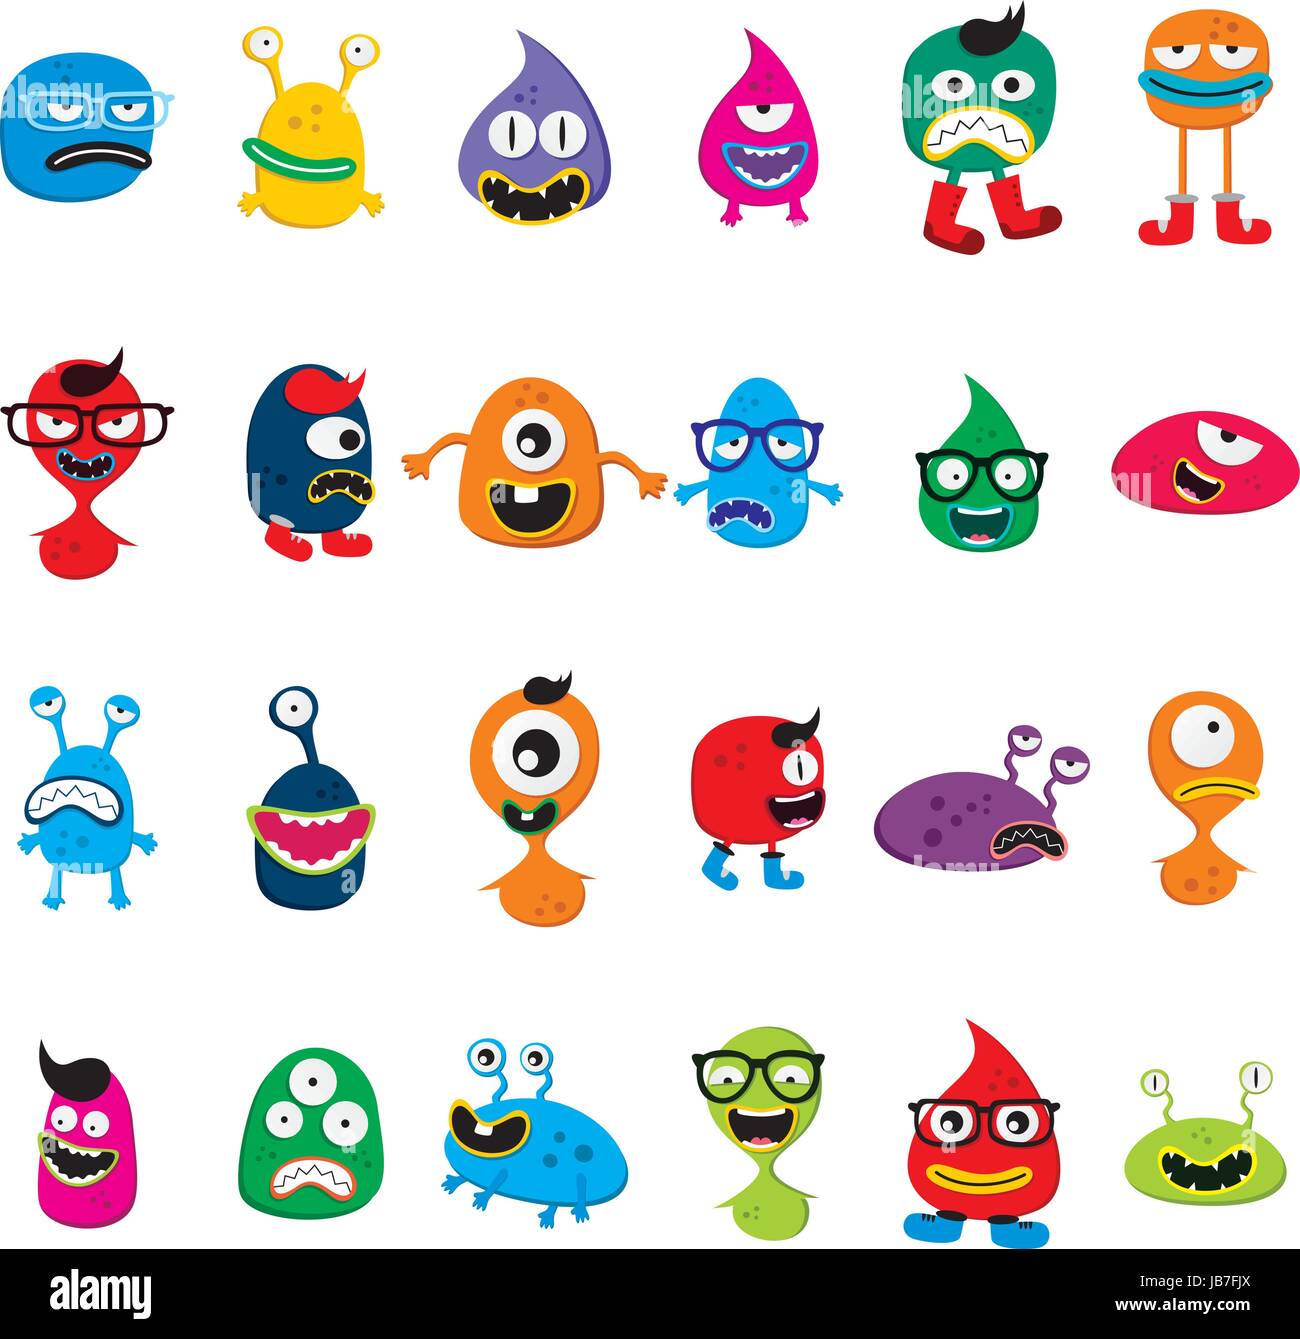 cute adorable ugly scary funny mascot monster set vector art Stock ...